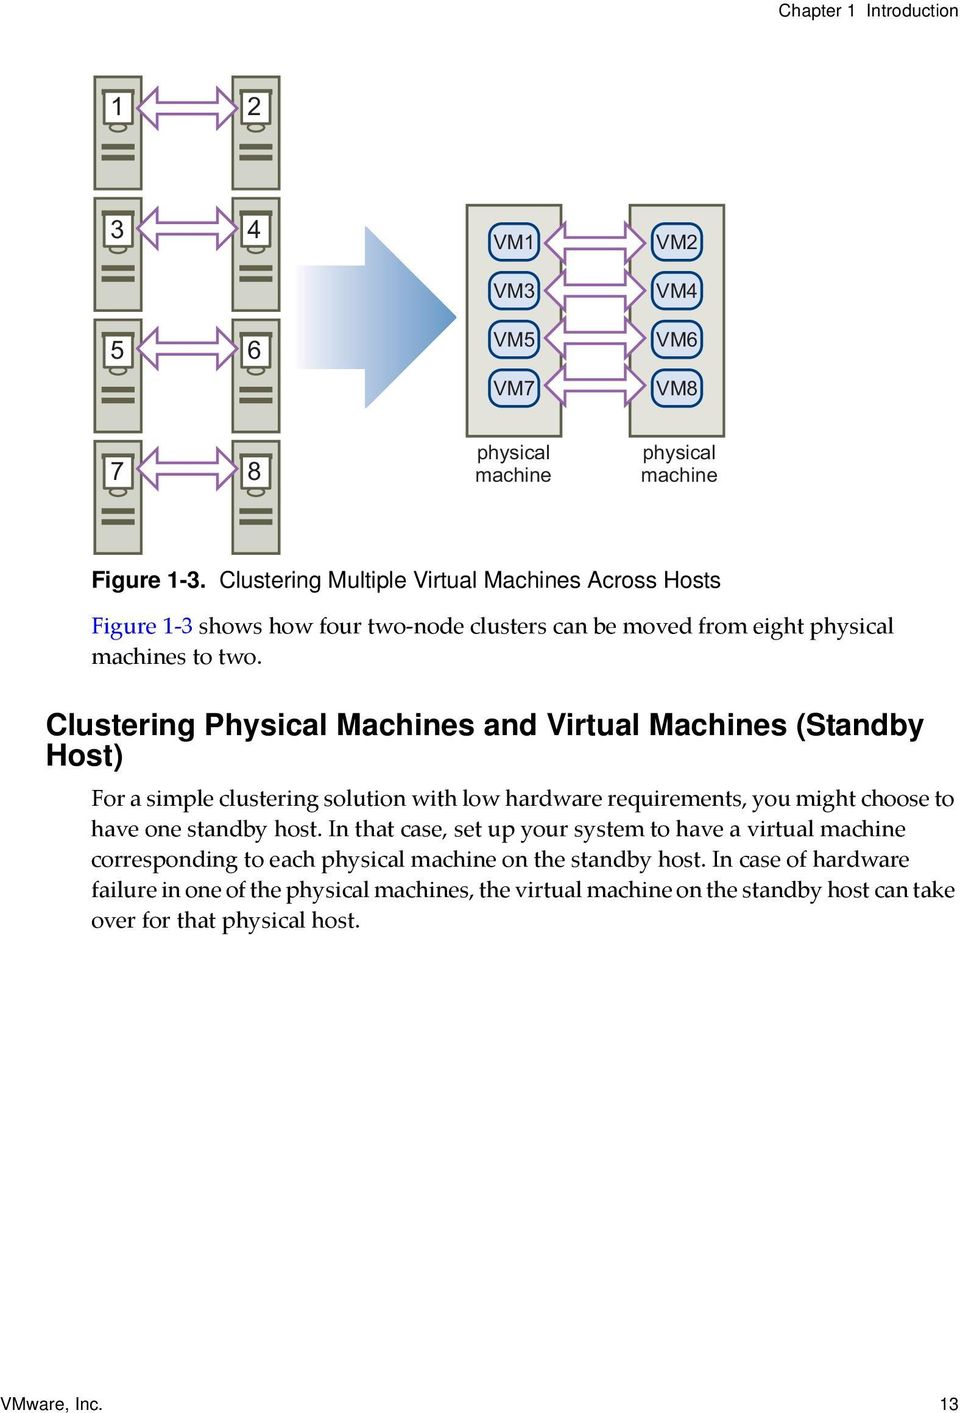 Clustering Physical Machines and Virtual Machines (Standby Host) For a simple clustering solution with low hardware requirements, you might choose to have one standby host.